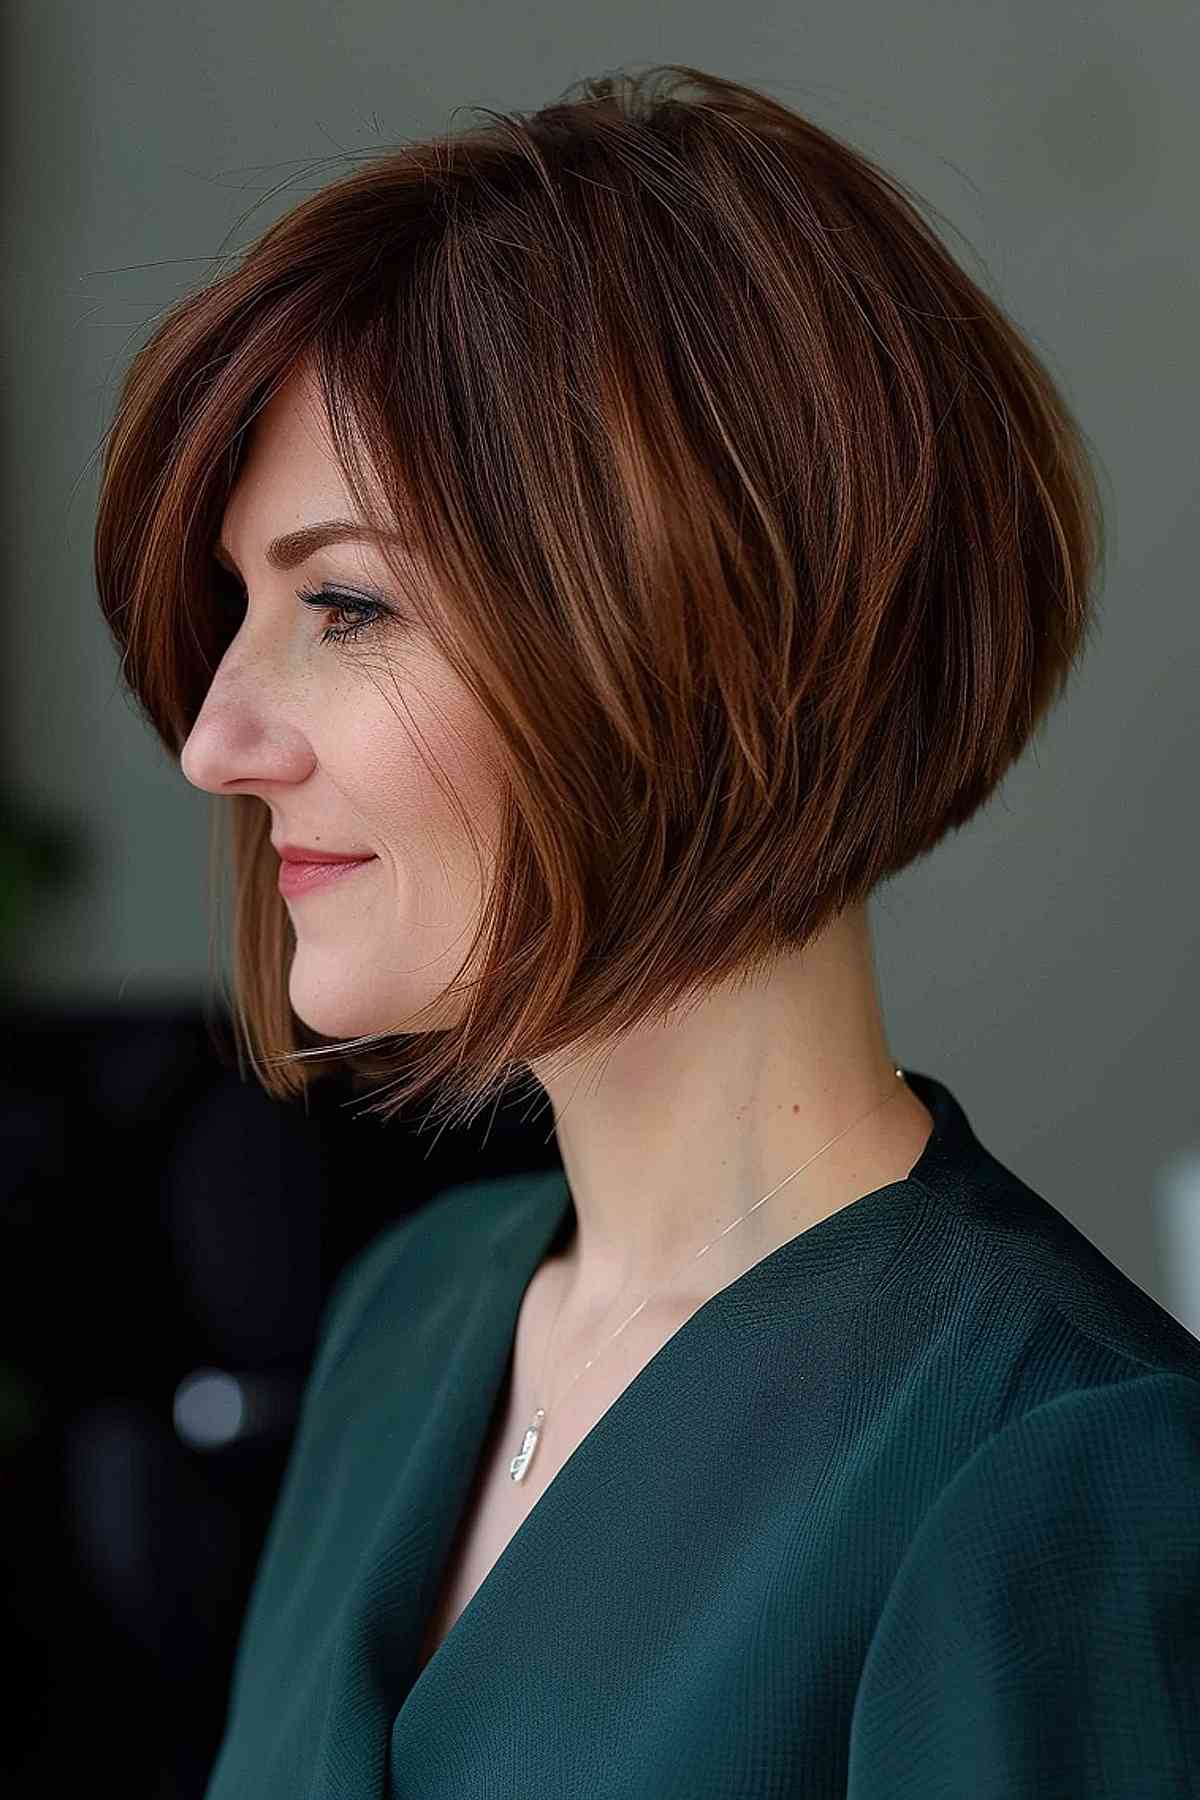 Layered bob haircut with a mix of shorter and longer layers in warm brown, ideal for fine to medium hair.